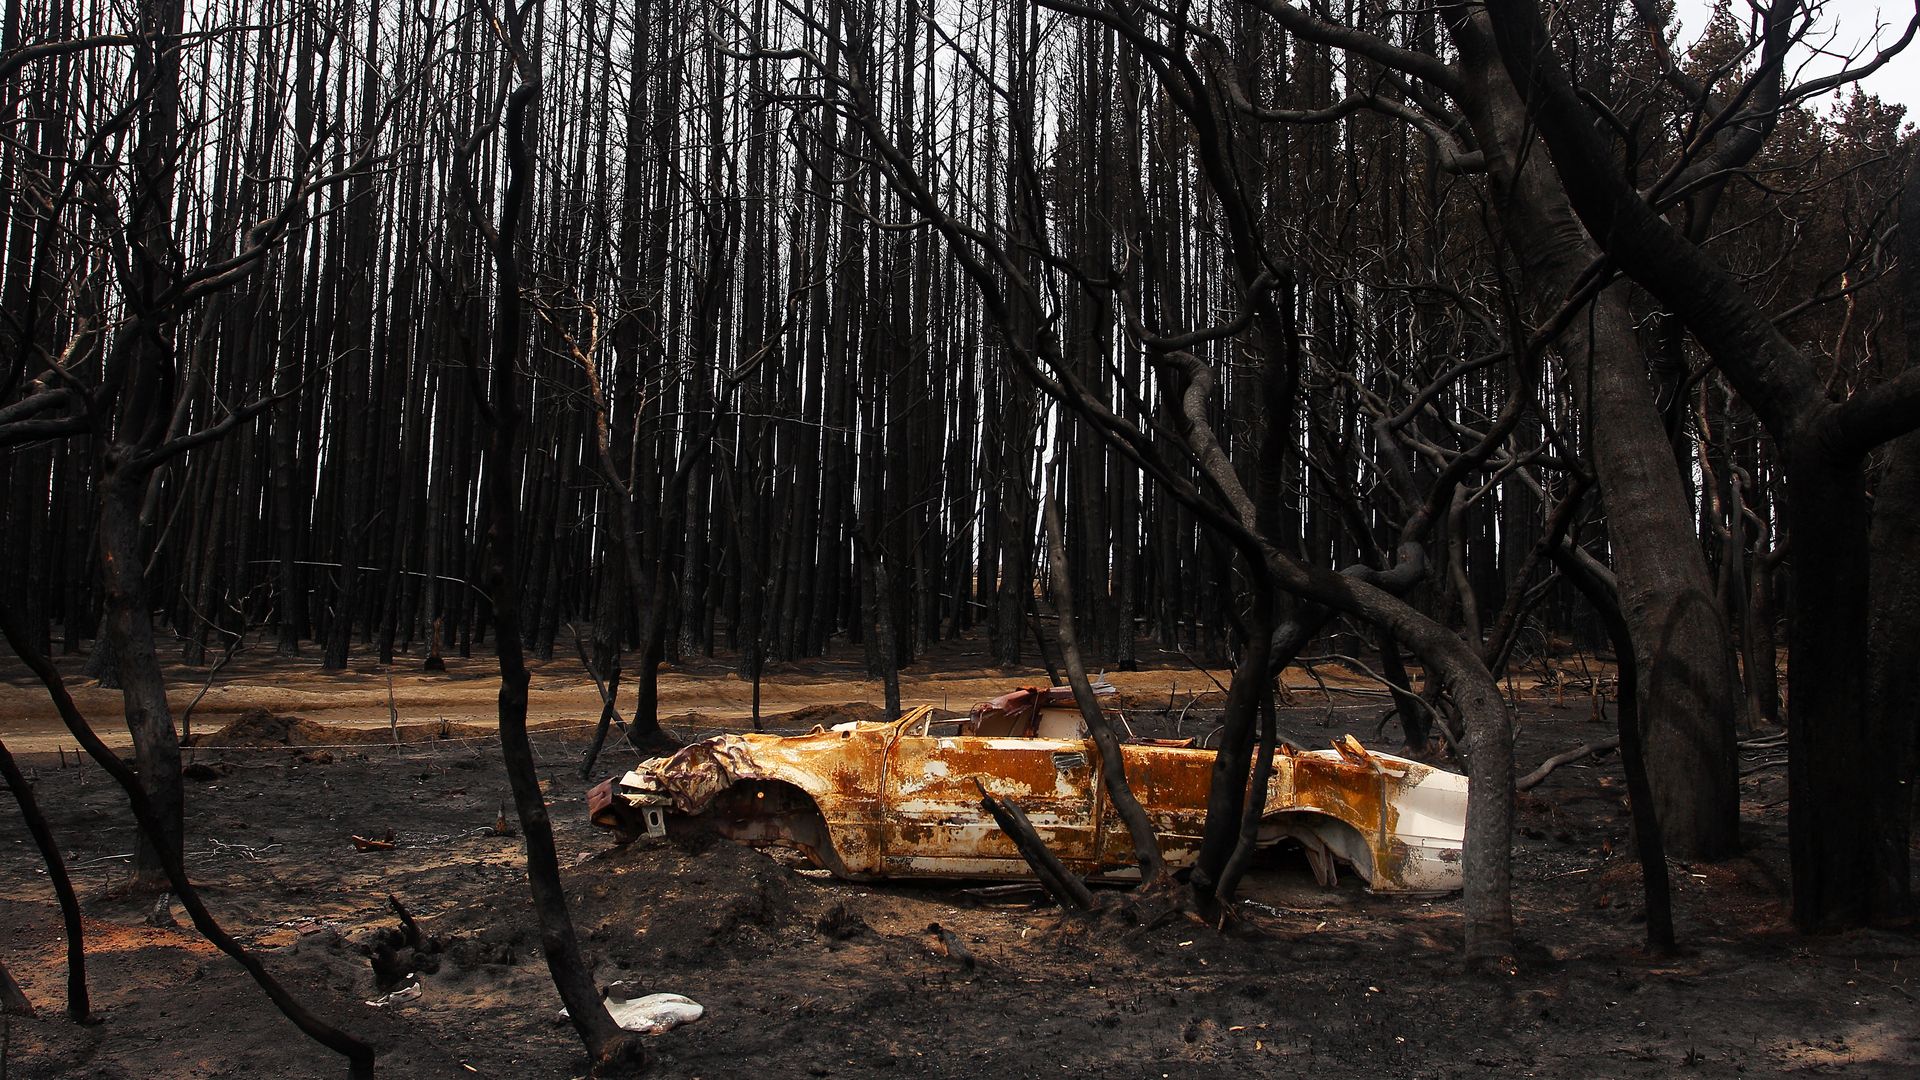 A burnt car in Australia during the wildfires